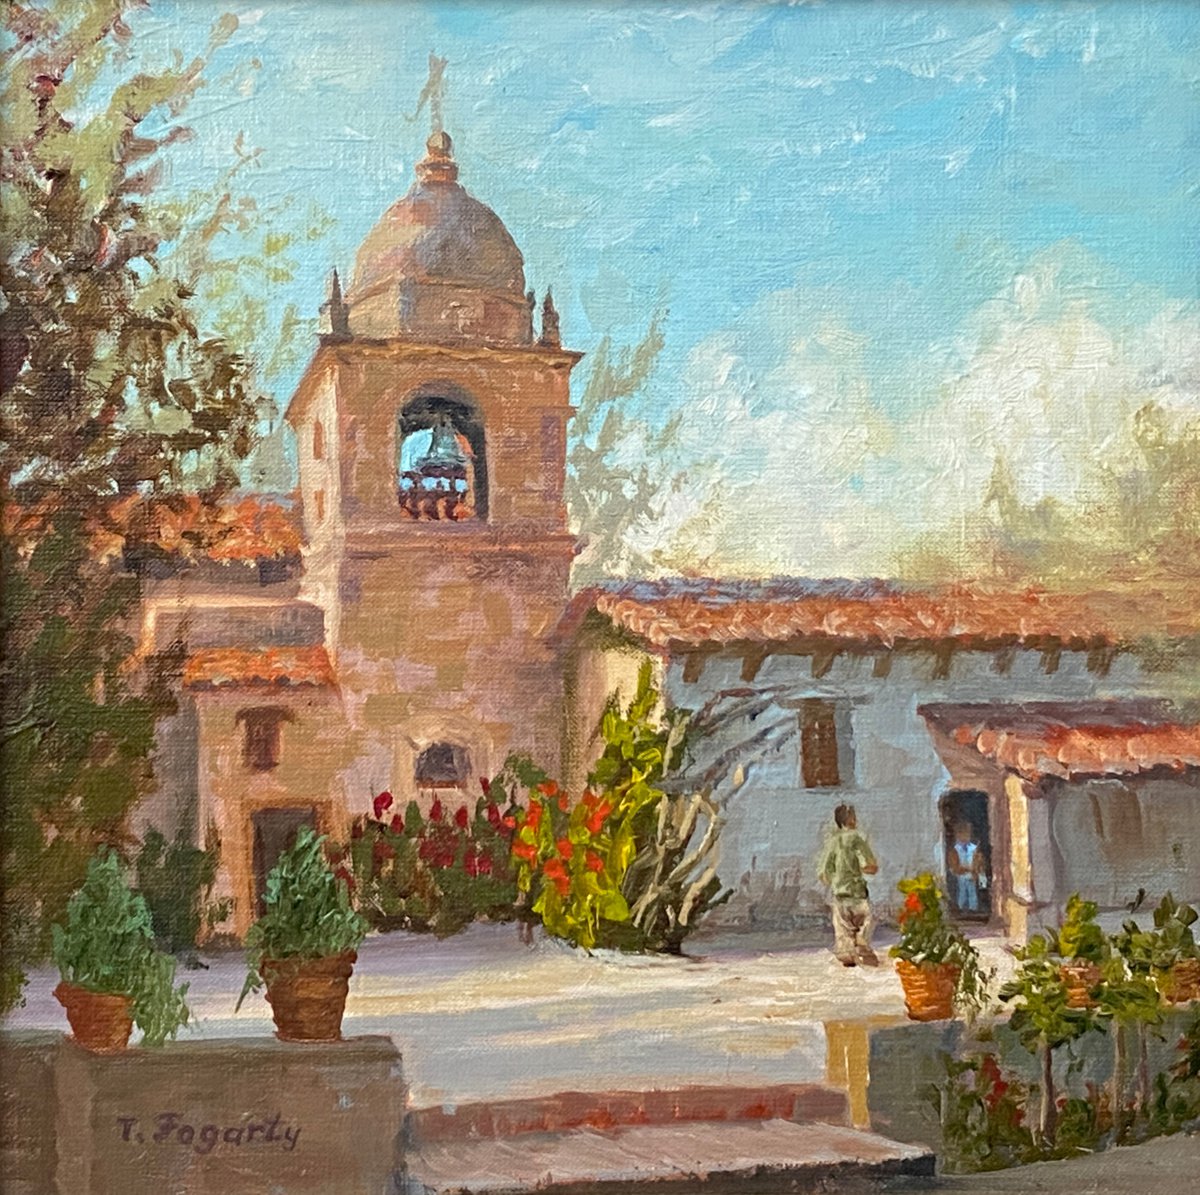 Carmel Mission Bell Tower and Courtyard by Tatyana Fogarty